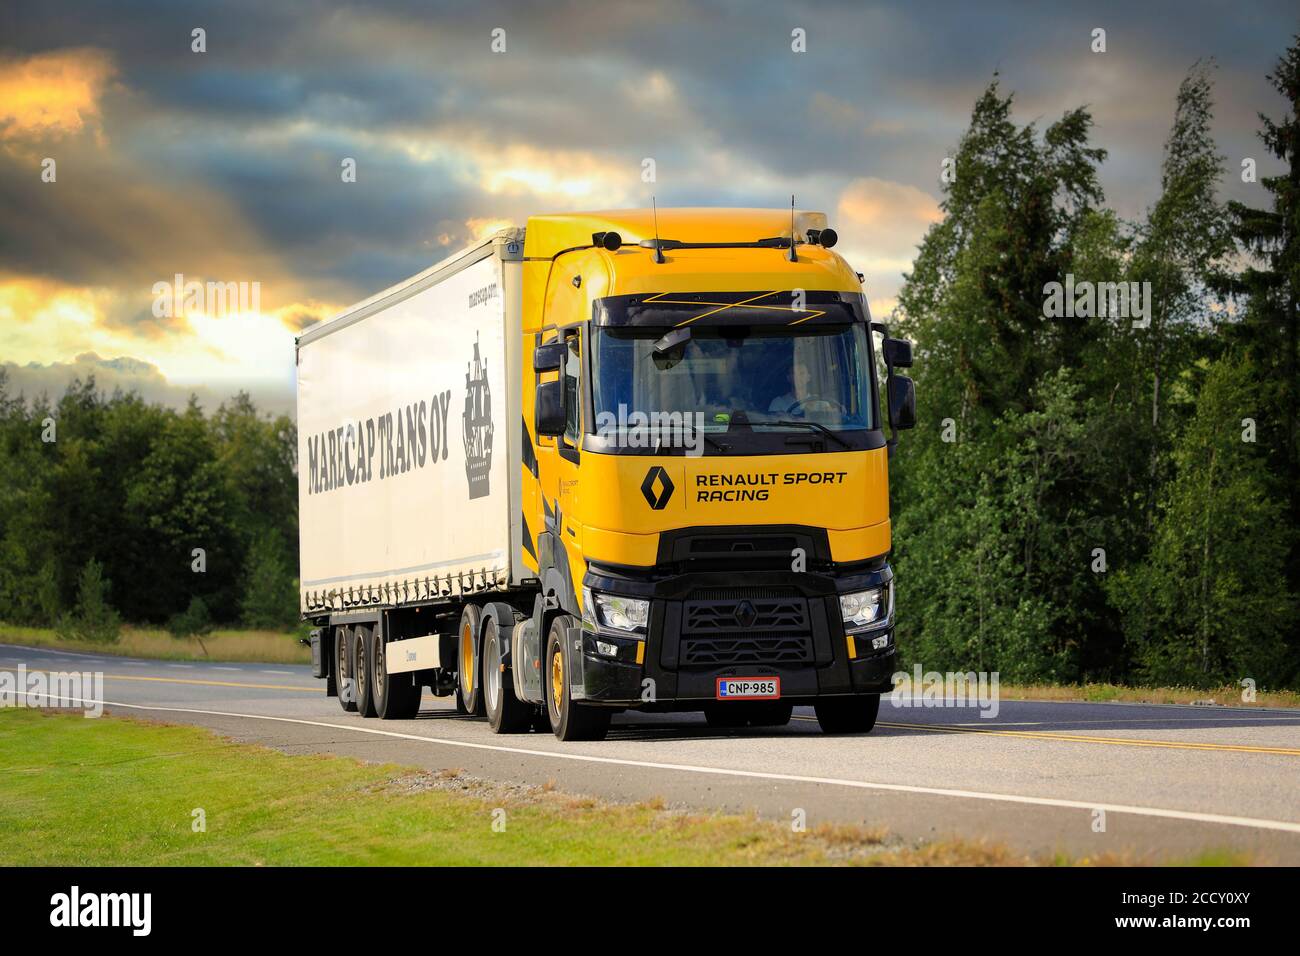 Renault Trucks T High Renault Sport Racing, Sirius yellow, limited edition of 100 vehicles, of which 10 in Finland. Forssa, Finland. Aug 21, 20. Stock Photo